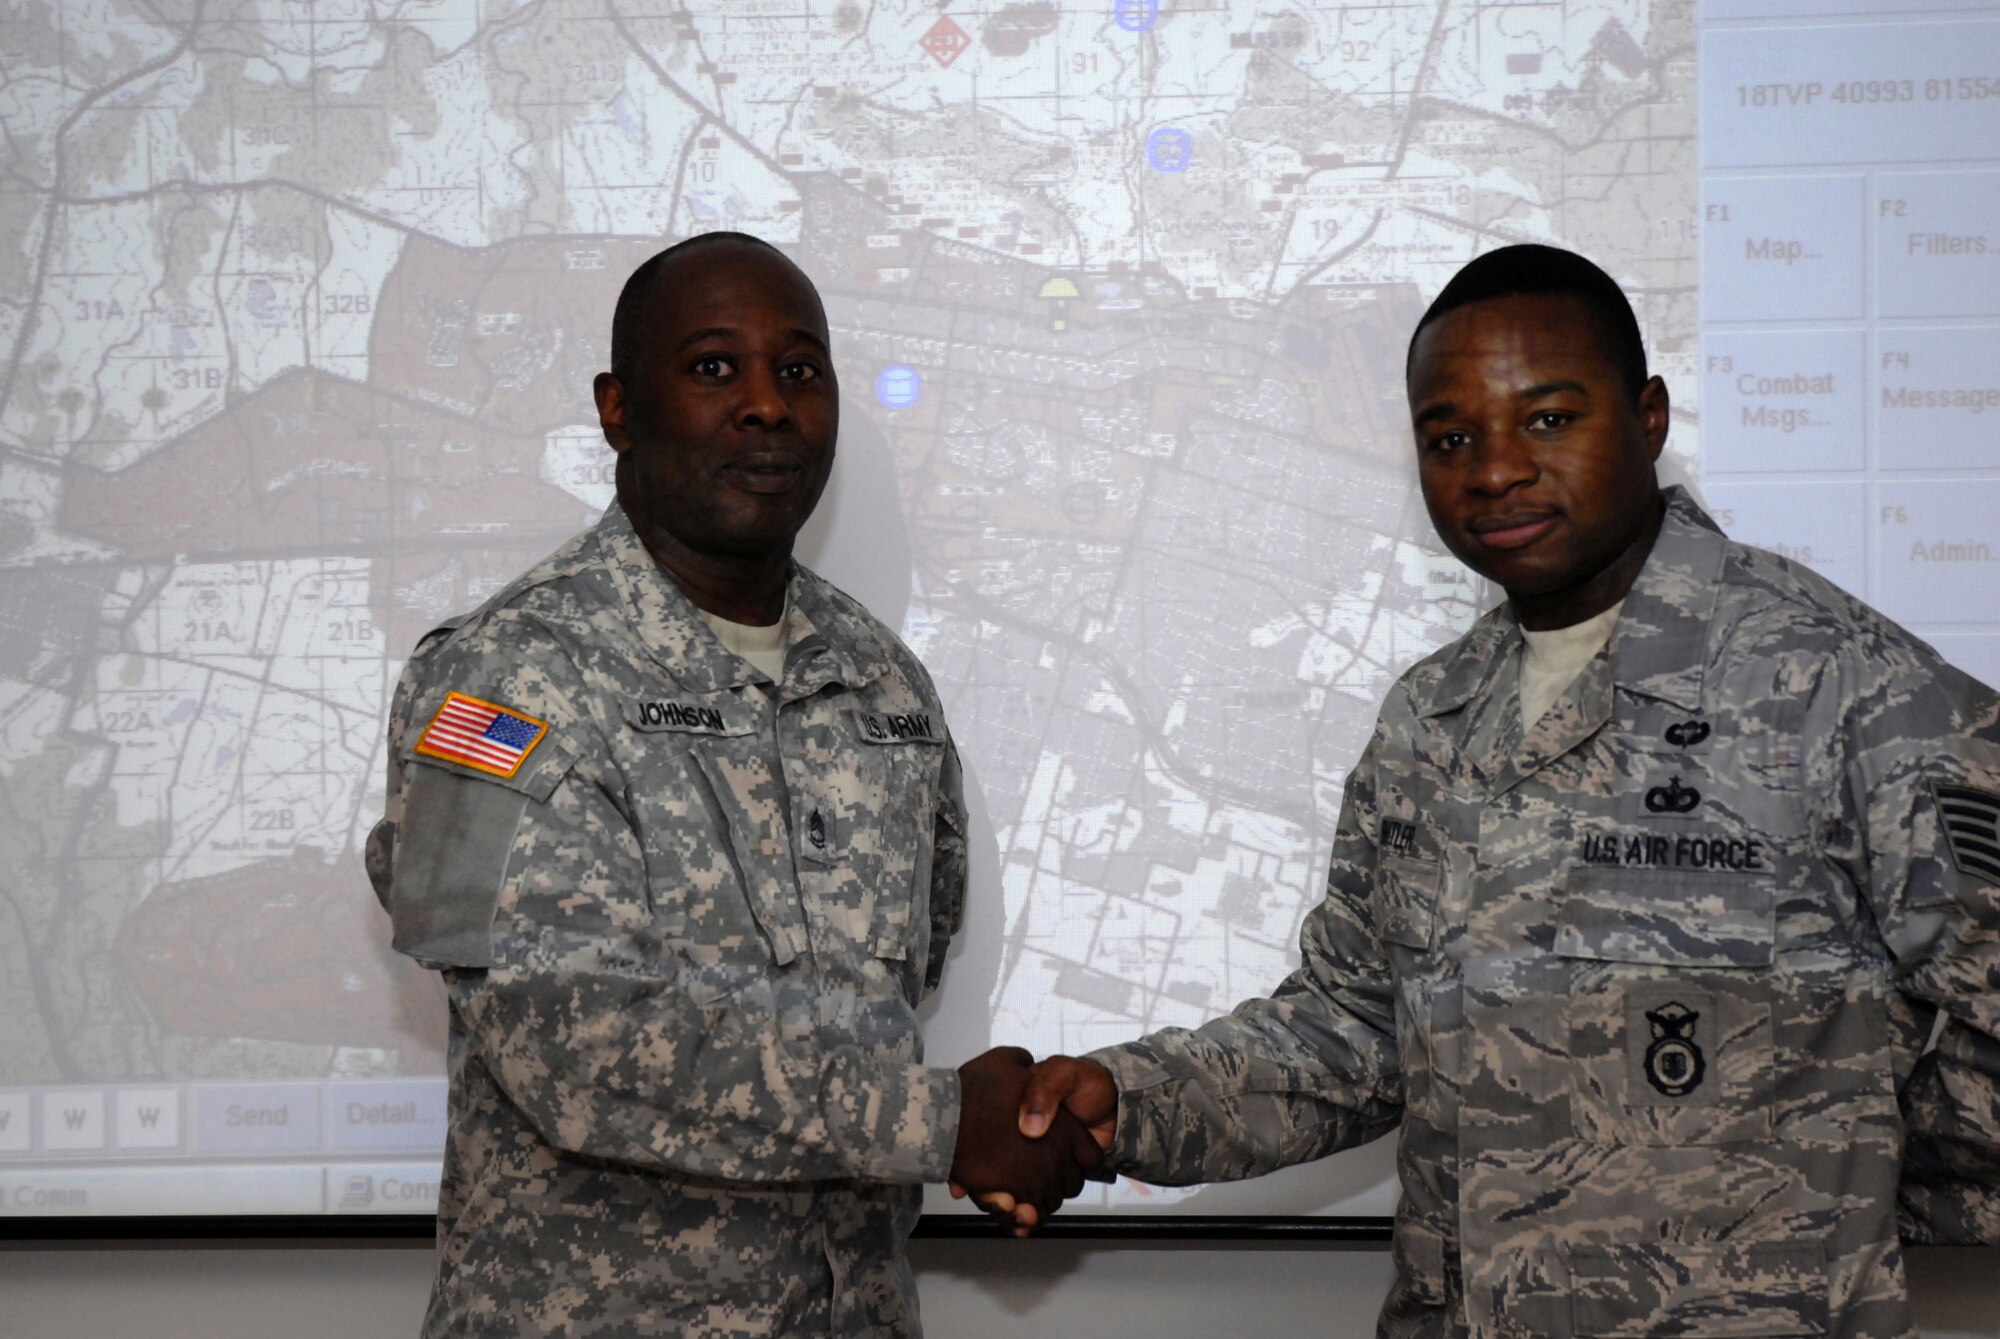 Contingency skills instructor Tech. Sgt. Shaylin Butler from the 421st Combat Training Squadron partnered with U.S. Army Sgt. 1st Class Gary Johnson from the 3rd Training Support Battalion at Fort Meade, Md., to spearhead the creation of an Air Force program allowing Airmen to train Airmen in Blue Force Tracker at the U.S. Air Force Expeditionary Center, Fort Dix, N.J.  August 29, 2009.   Having Airmen training Airmen helps alleviate some of the demand placed on the Army by reducing the Air Force's demand for their training. (U.S. Air Force Photo/Tech. Sgt. Paul R. Evans)